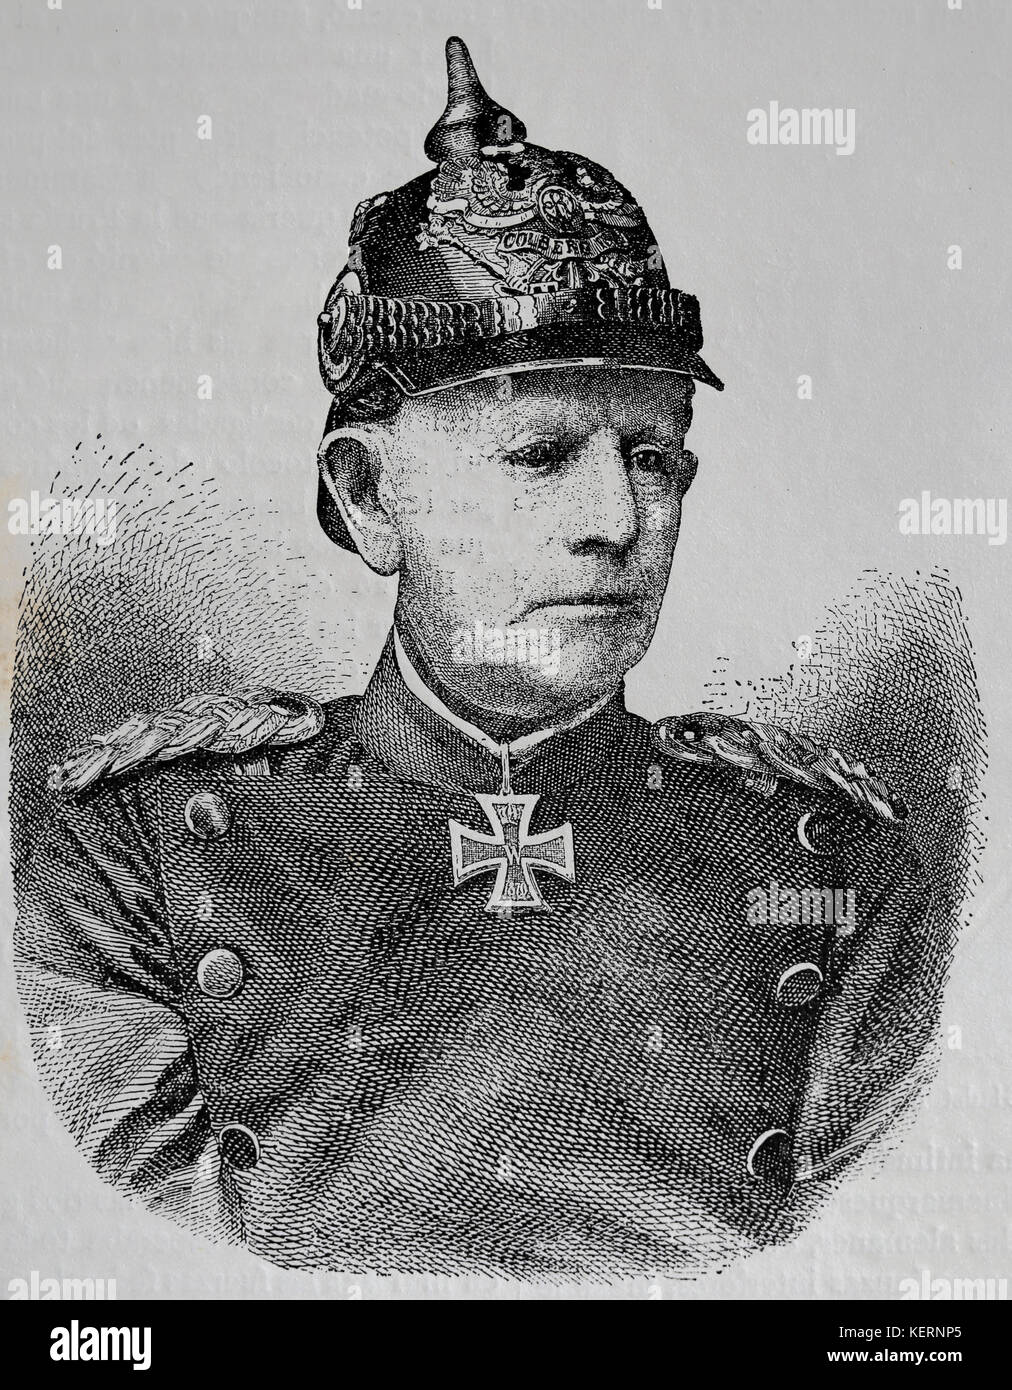 Helmuth von Moltke the Elder (1800-1891). German Field Marshal. Chief of staff of the Prussian Army. Engraving, Nuestro Siglo, 1883, Barcelona, Spain. Stock Photo